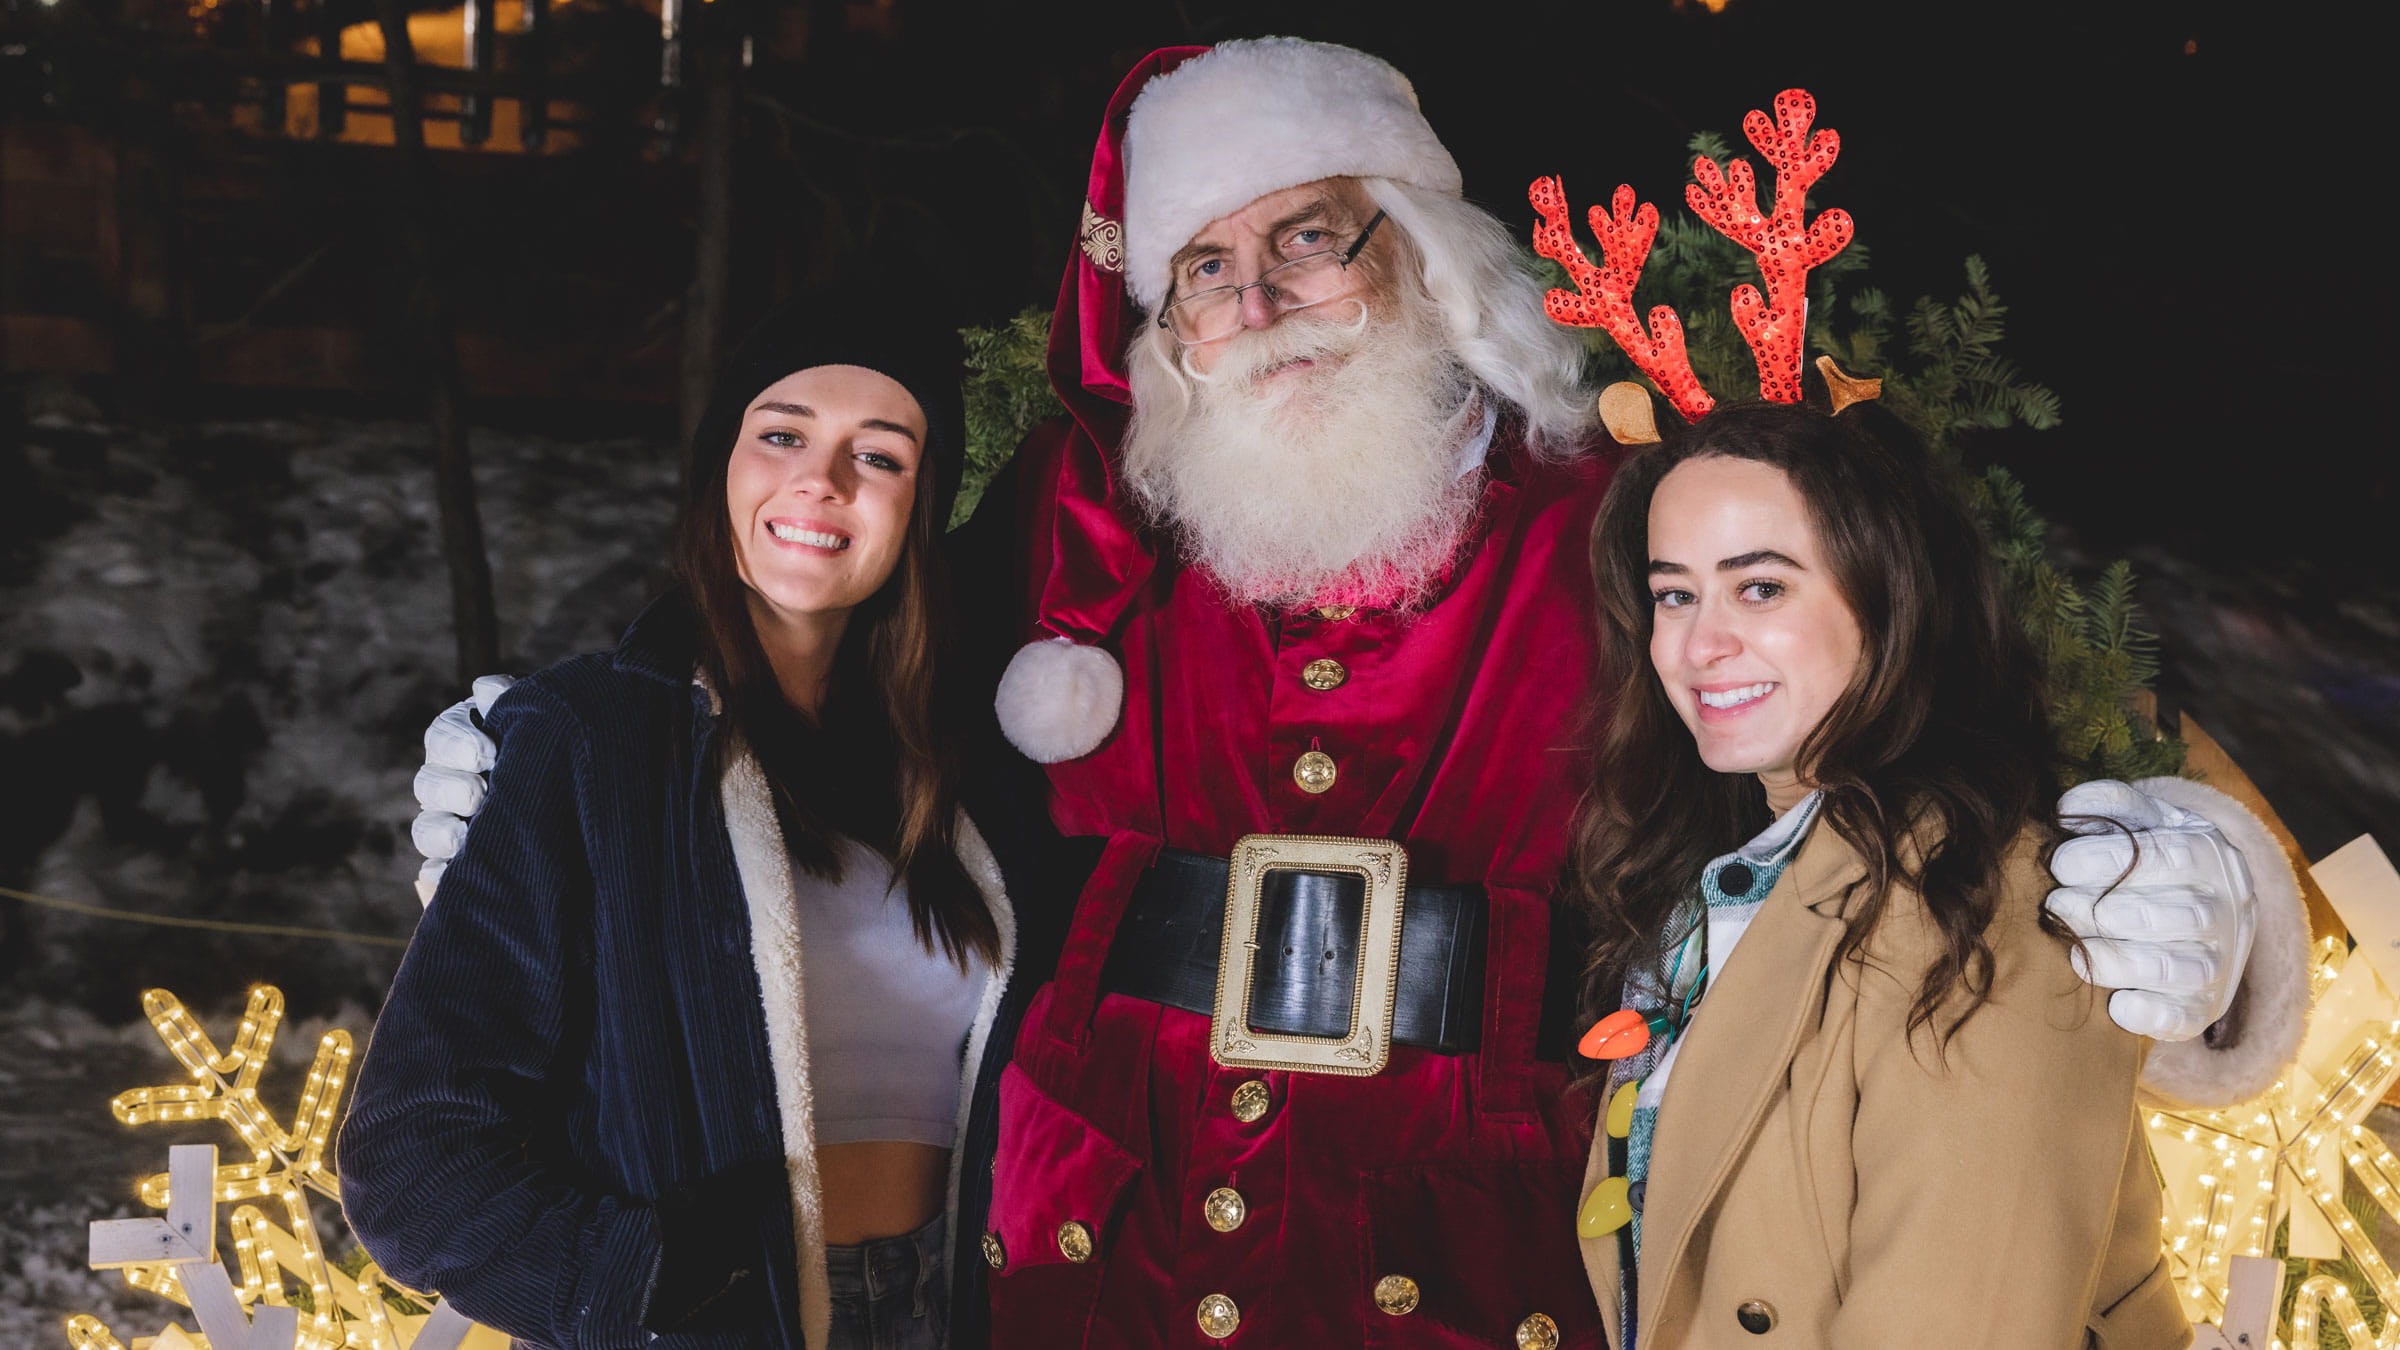 Santa taking a photo with two young females